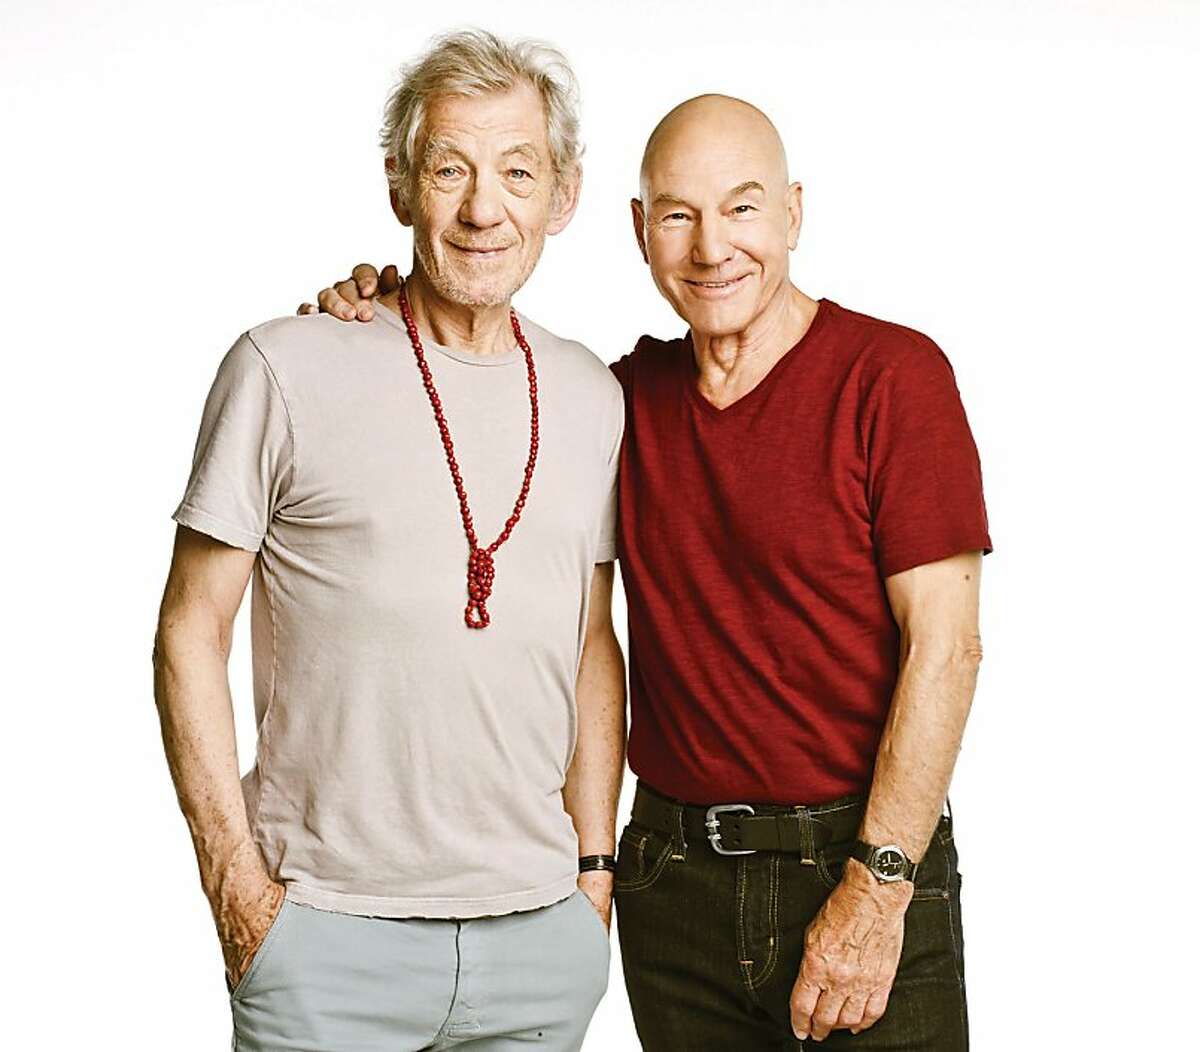 Acting titans Ian McKellen (left) and Patrick Stewart star in Harold Pinter's "No Man's Land" at Berkeley Repertory Theatre prior to the play's run on Broadway. "No Man's Land" runs Aug. 3-31 in the Roda Theatre. Photo by Jason Bell